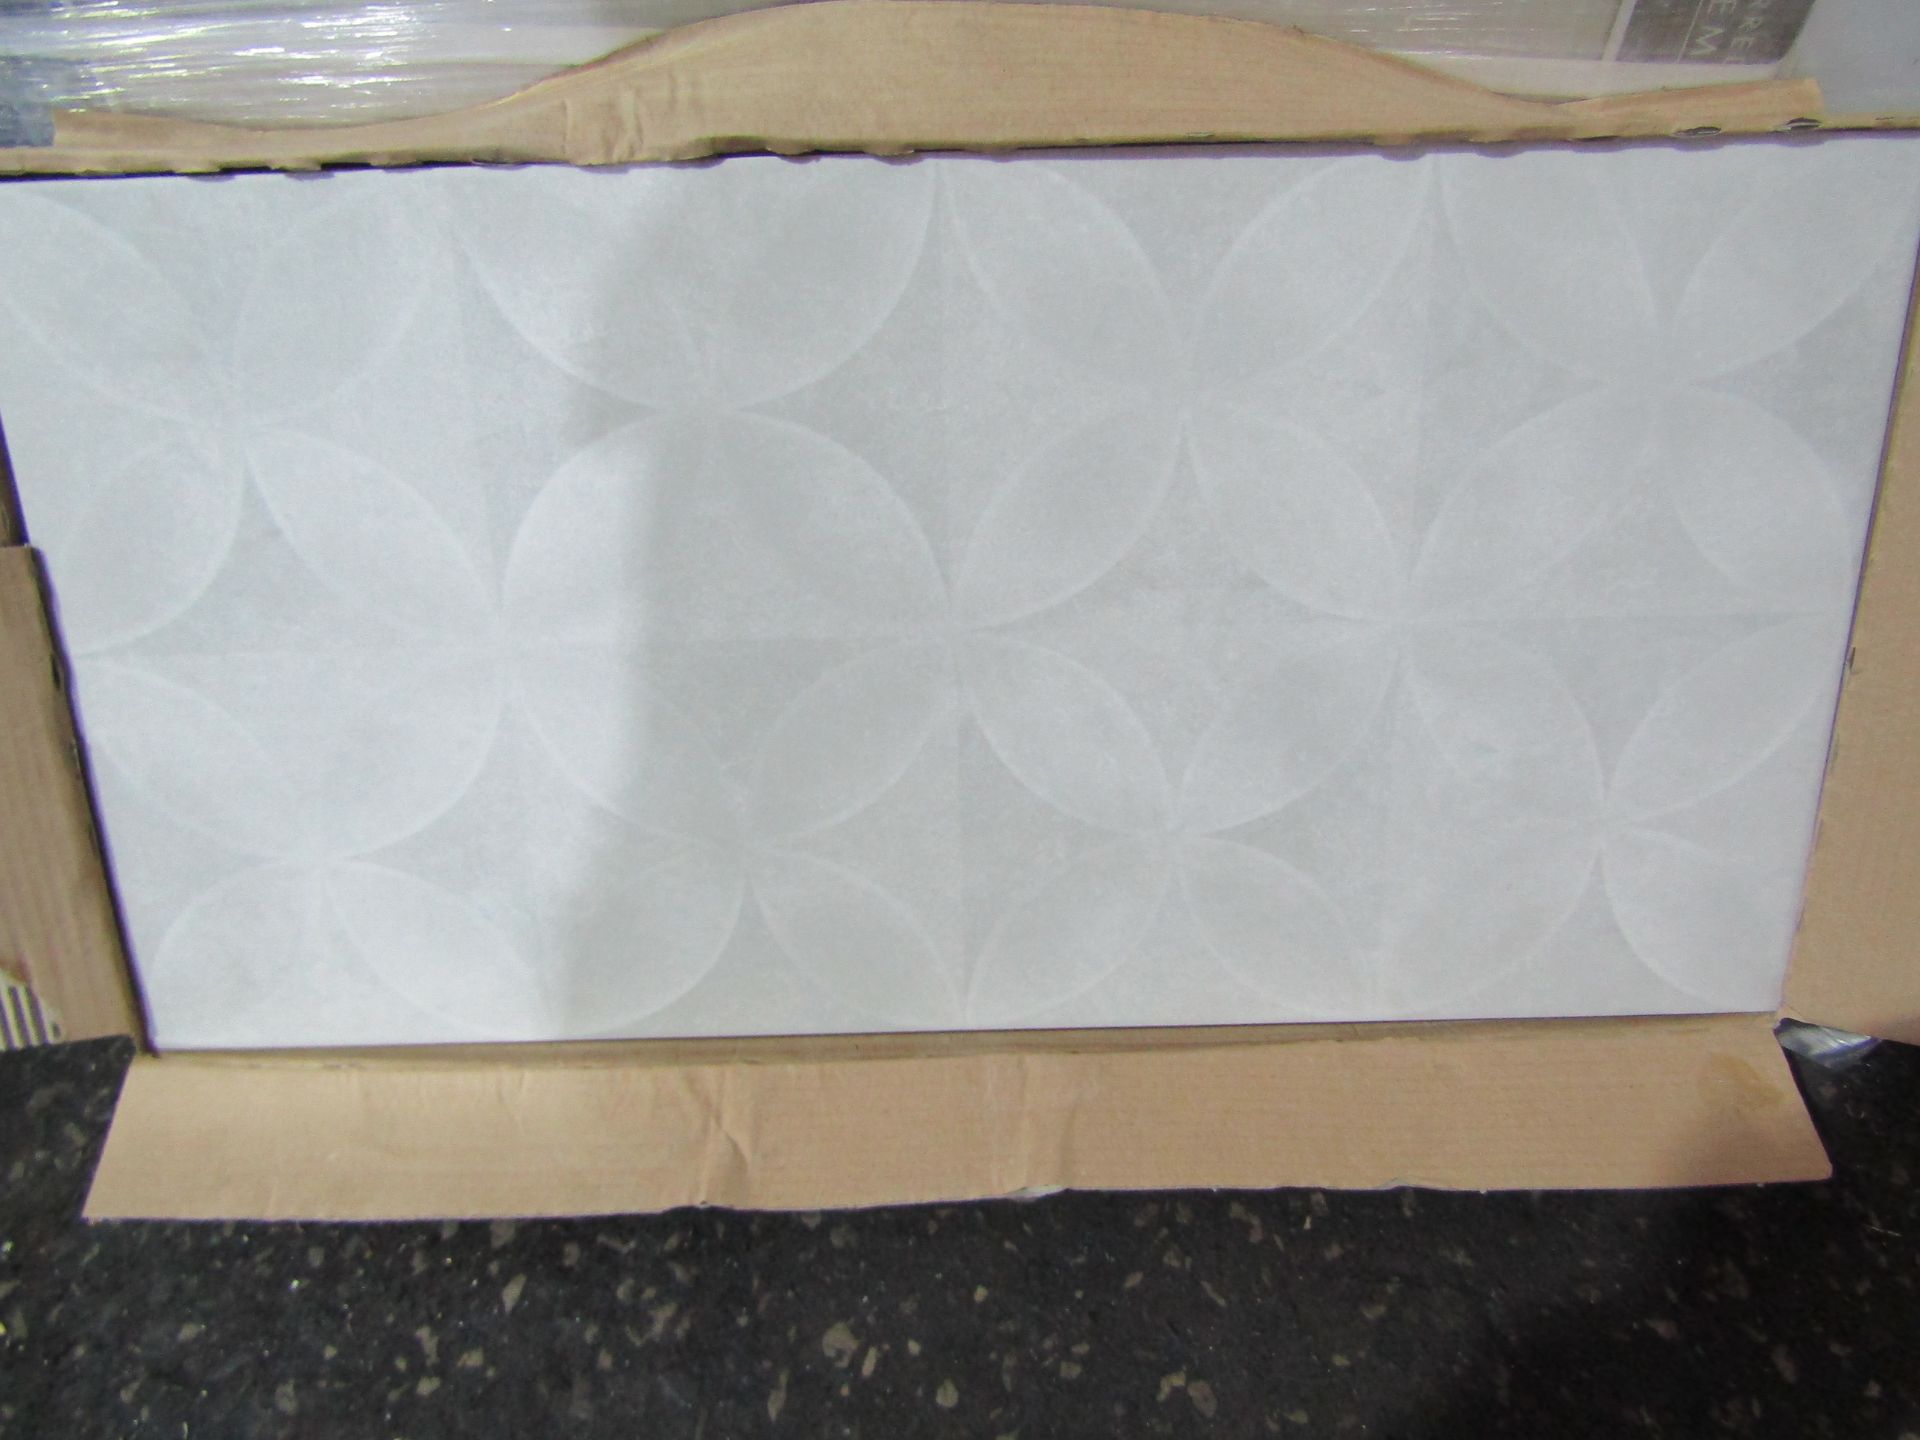 1X Pallet Containing 20x Packs of 5 Johnsons 600x300mm Tweed Blanc Floor and Wall Tiles - - Image 2 of 2